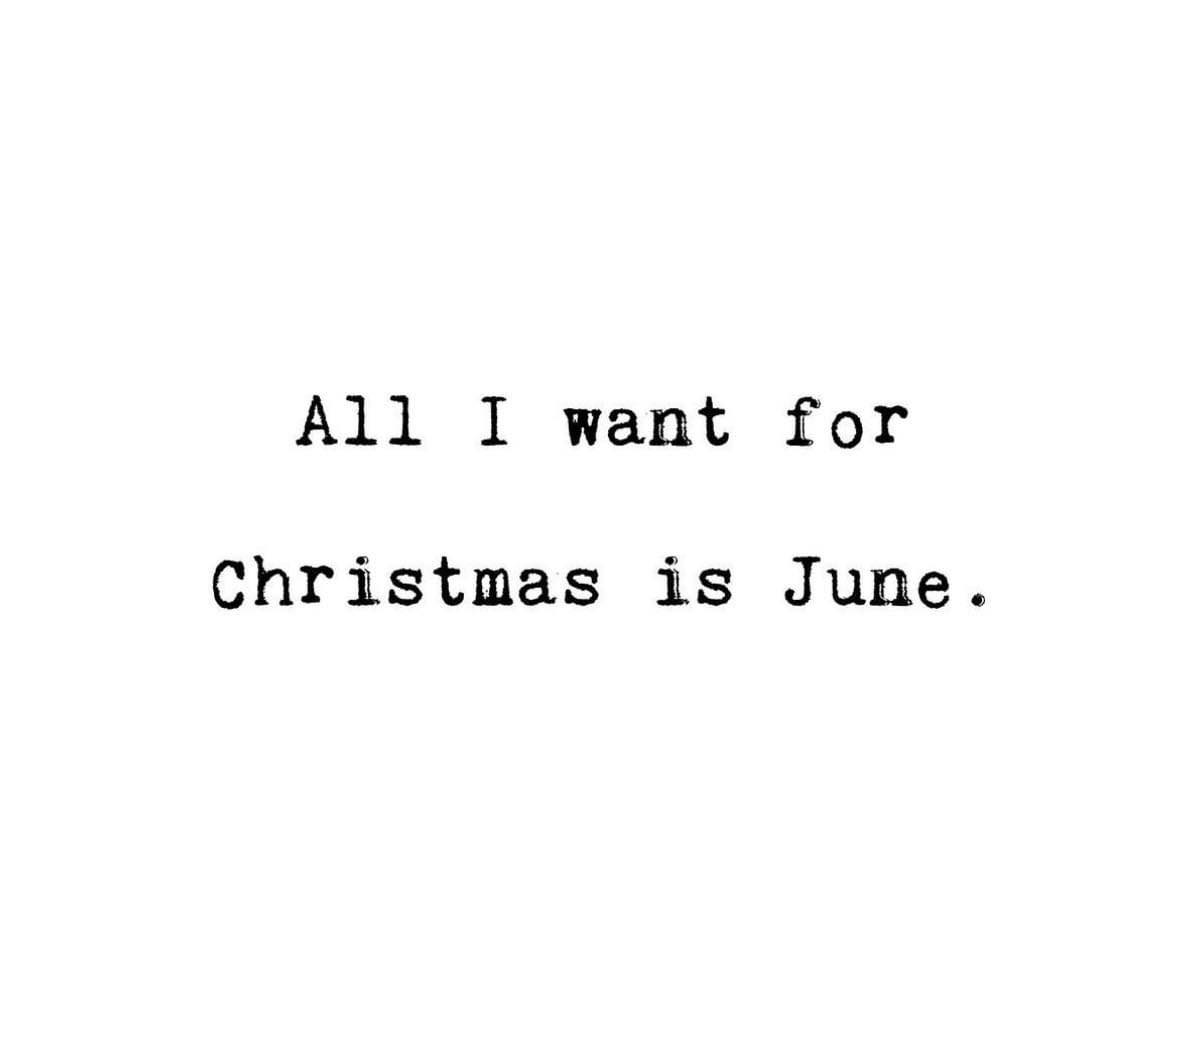 all_I_want_for_Christmas_is_June.jpg